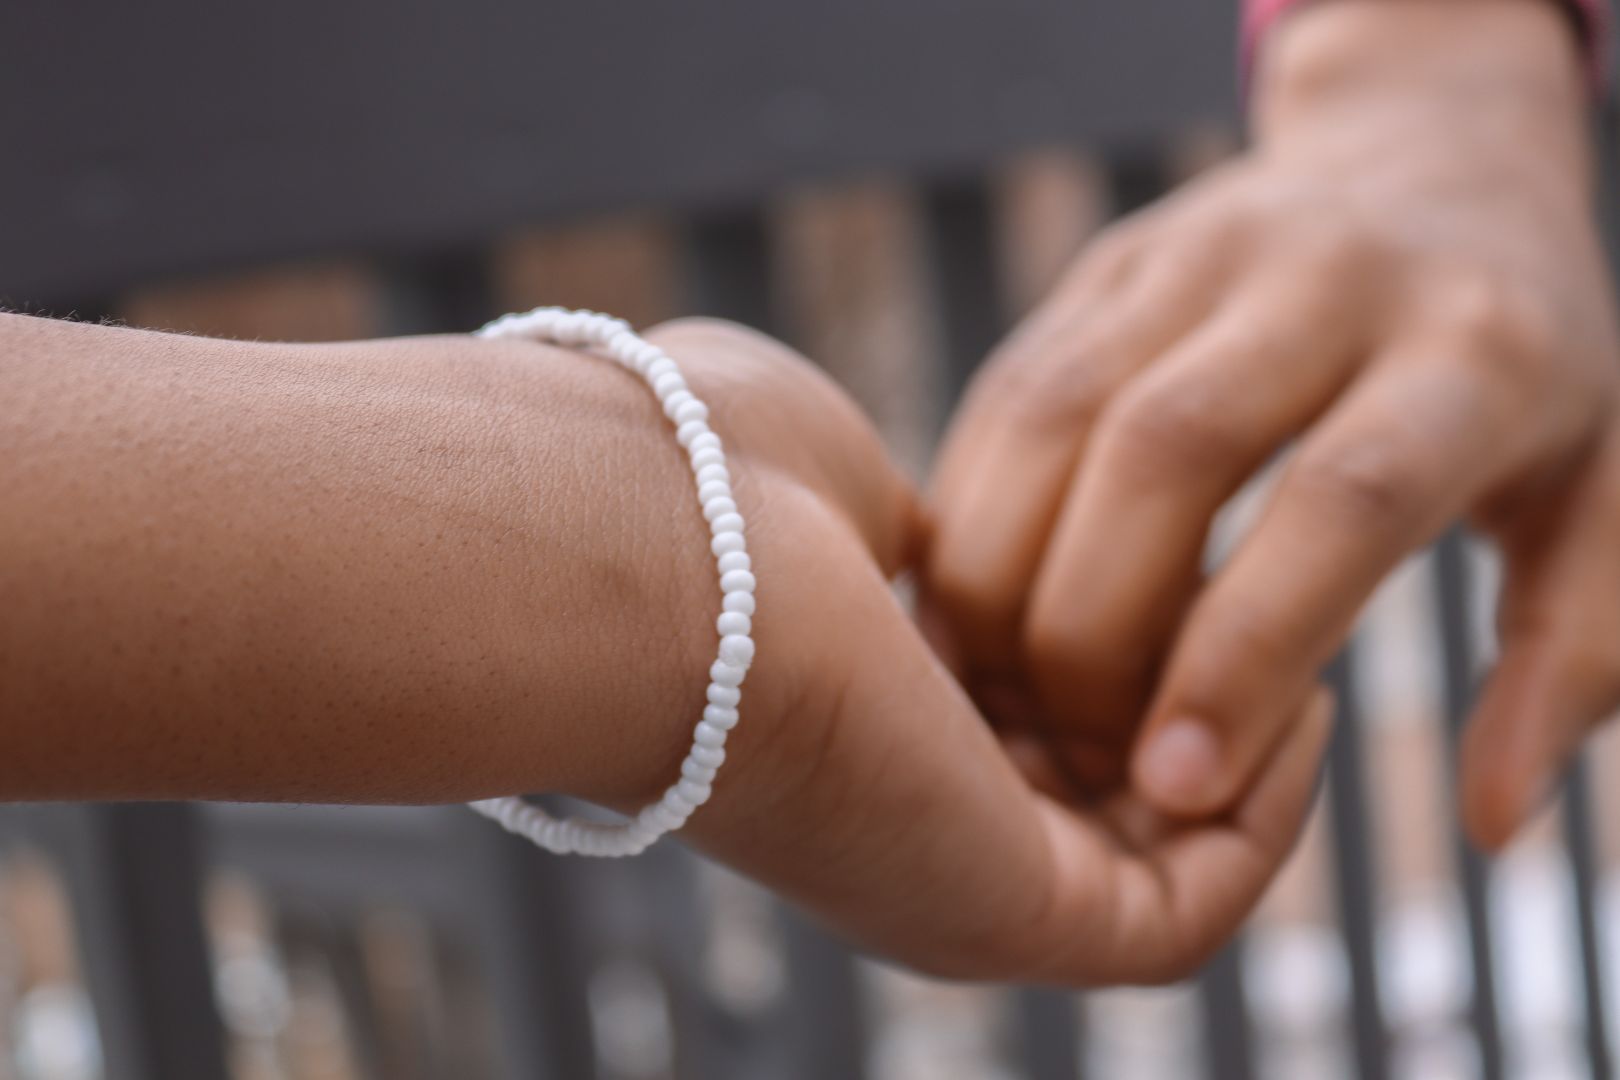 One hand in another, one wrist is wearing a white beaded bracelet